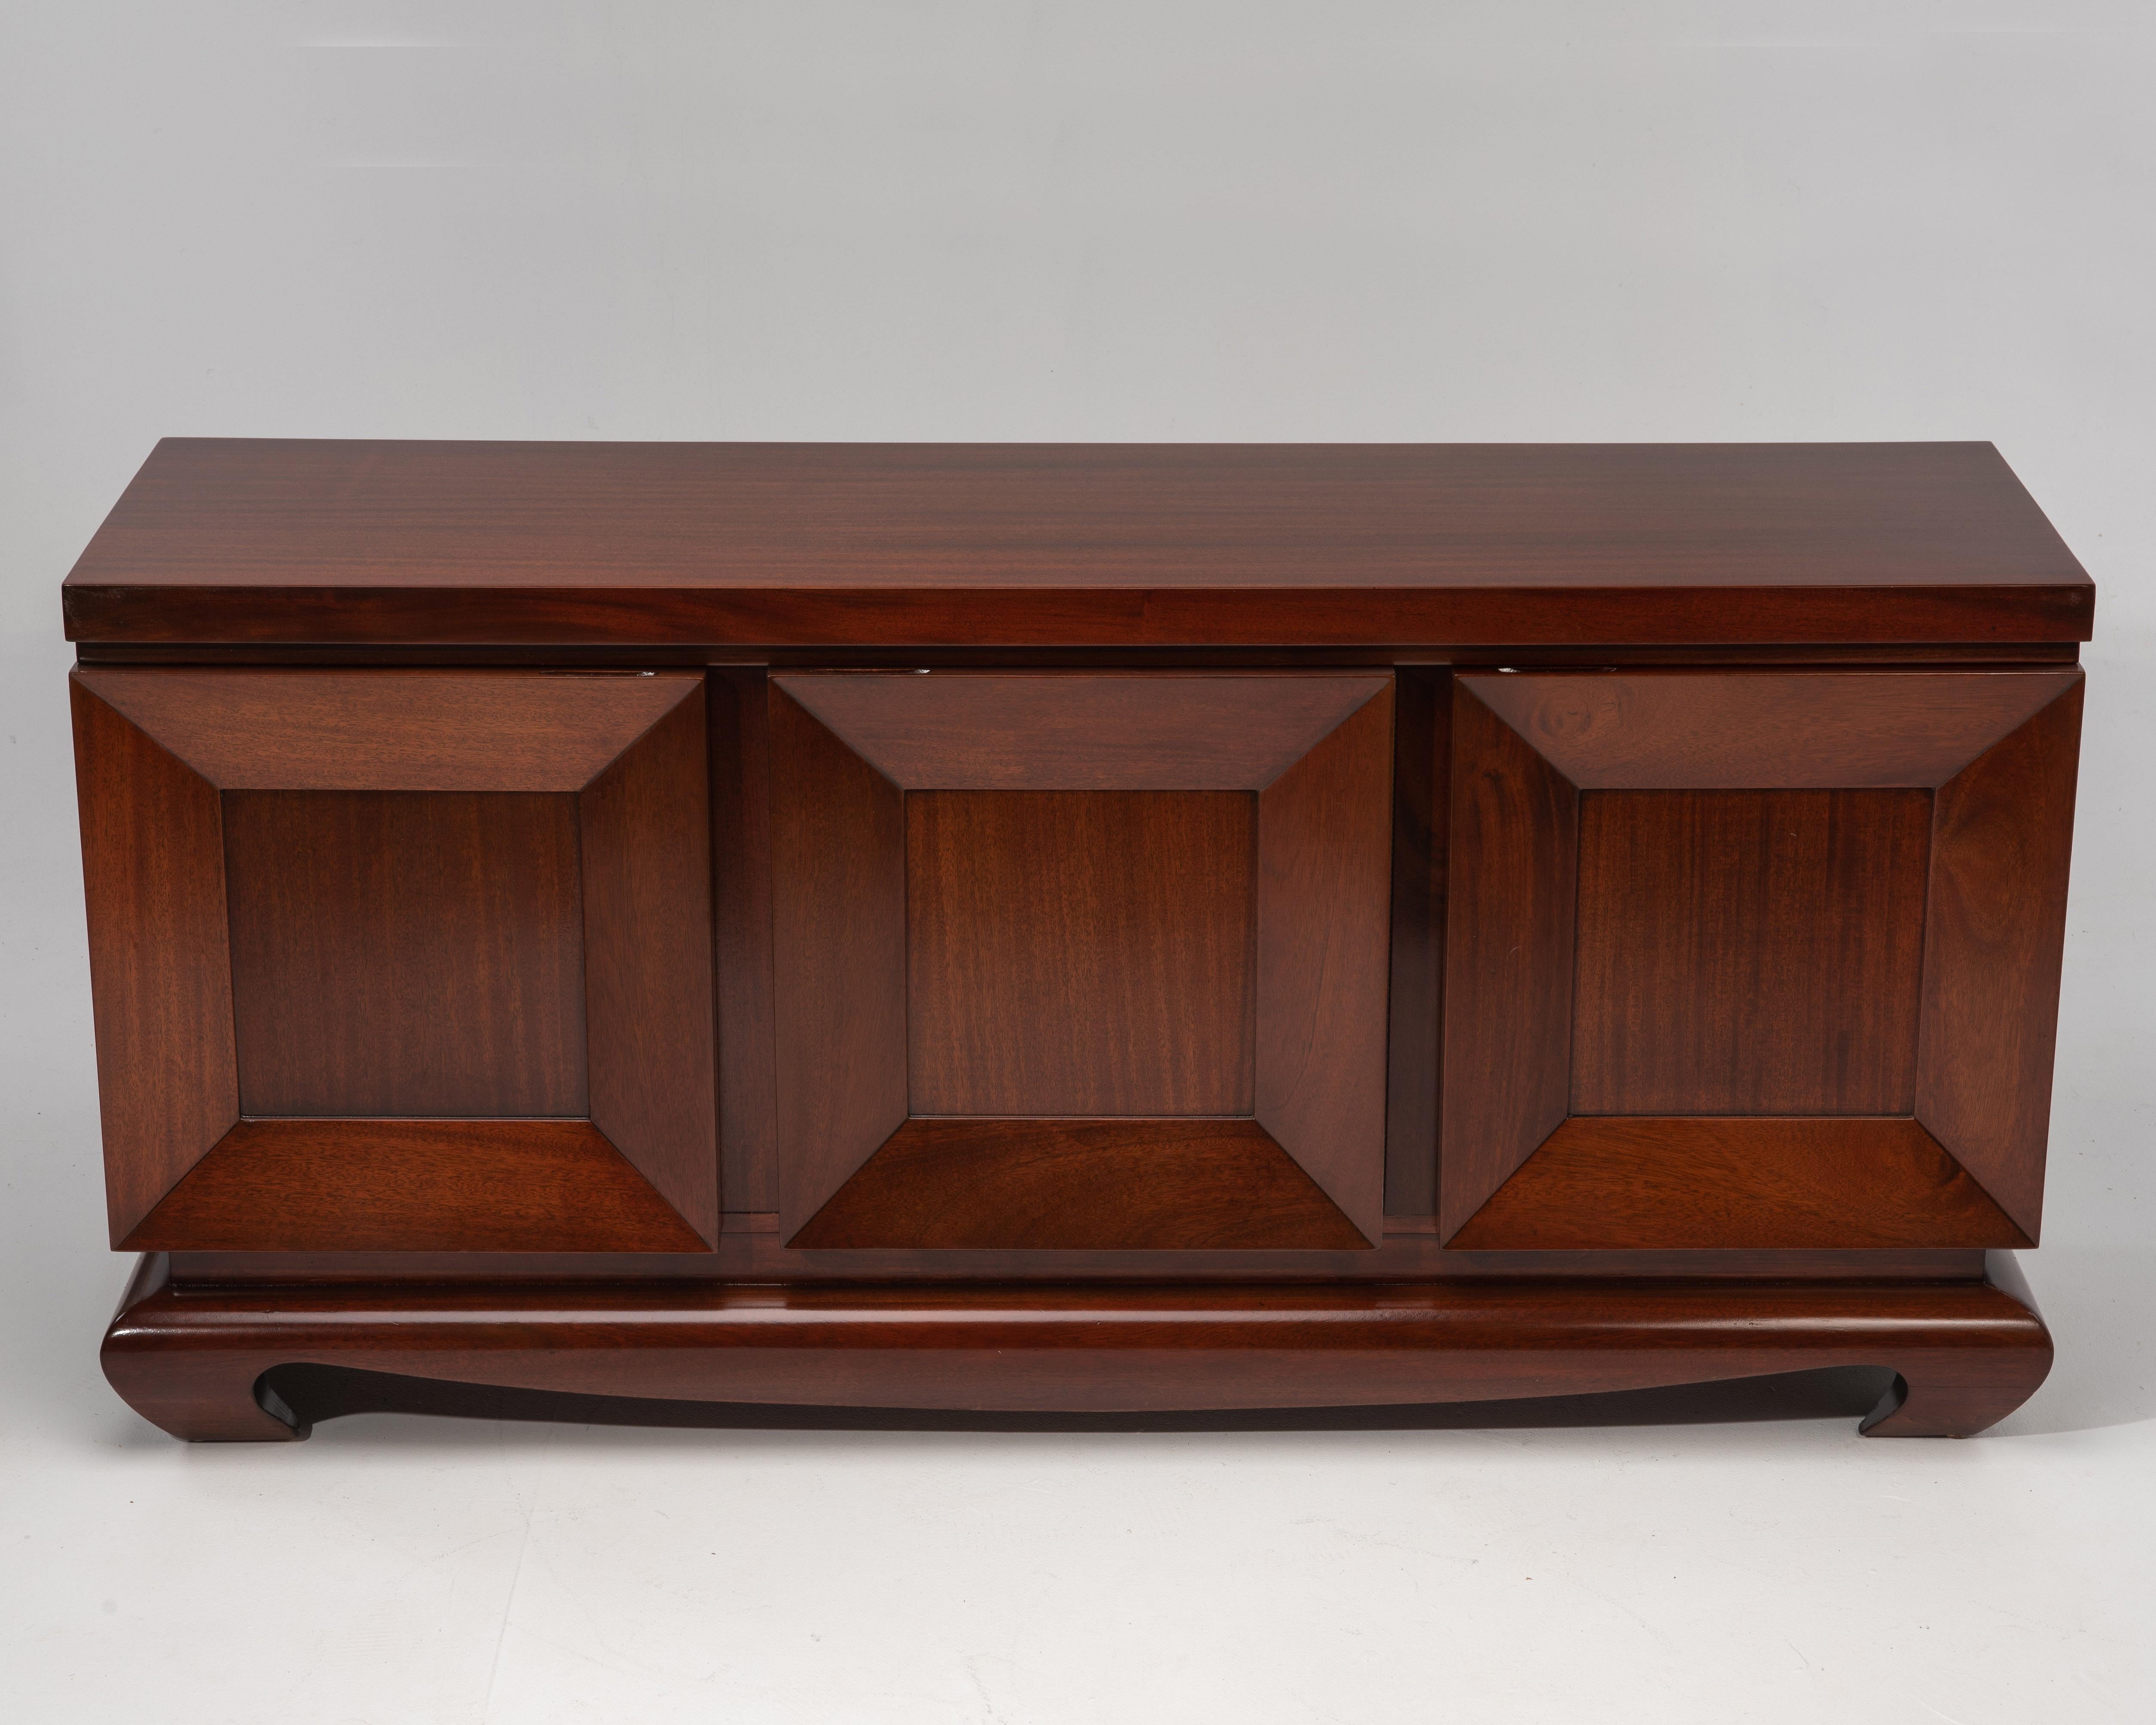 Picture frame credenza by Seth Ben-Ari of Scotch Plains, New Jersey. Clear, straight grain mahogany wood case with three doors. The right door conceals three drawers, the center and left doors open to conceal a shelf. Impeccable craftsmanship, 1950s.